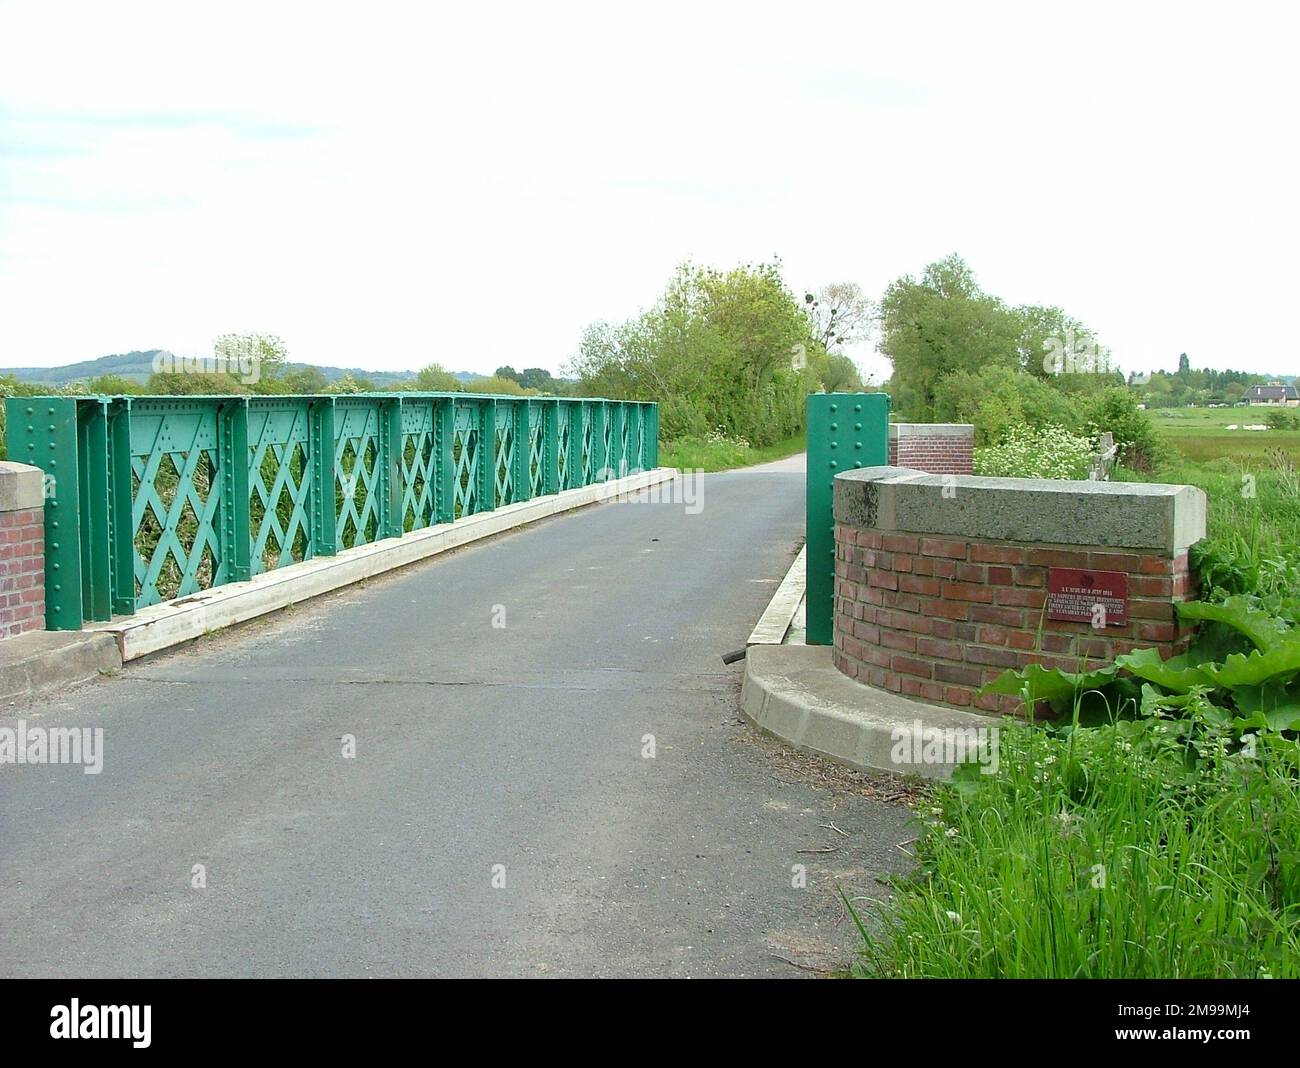 This is one of the few remaining, perhaps the only one, of the bridges built by the Engineers to replace original structures over the River Dives that were destroyed at dawn on D-Day. Just visible in the centre of the right hand end of the brick wall is a small plaque that commemorates the 1st Canadian Parachute Battalion and the 3rd Parachute Squadron. Stock Photo